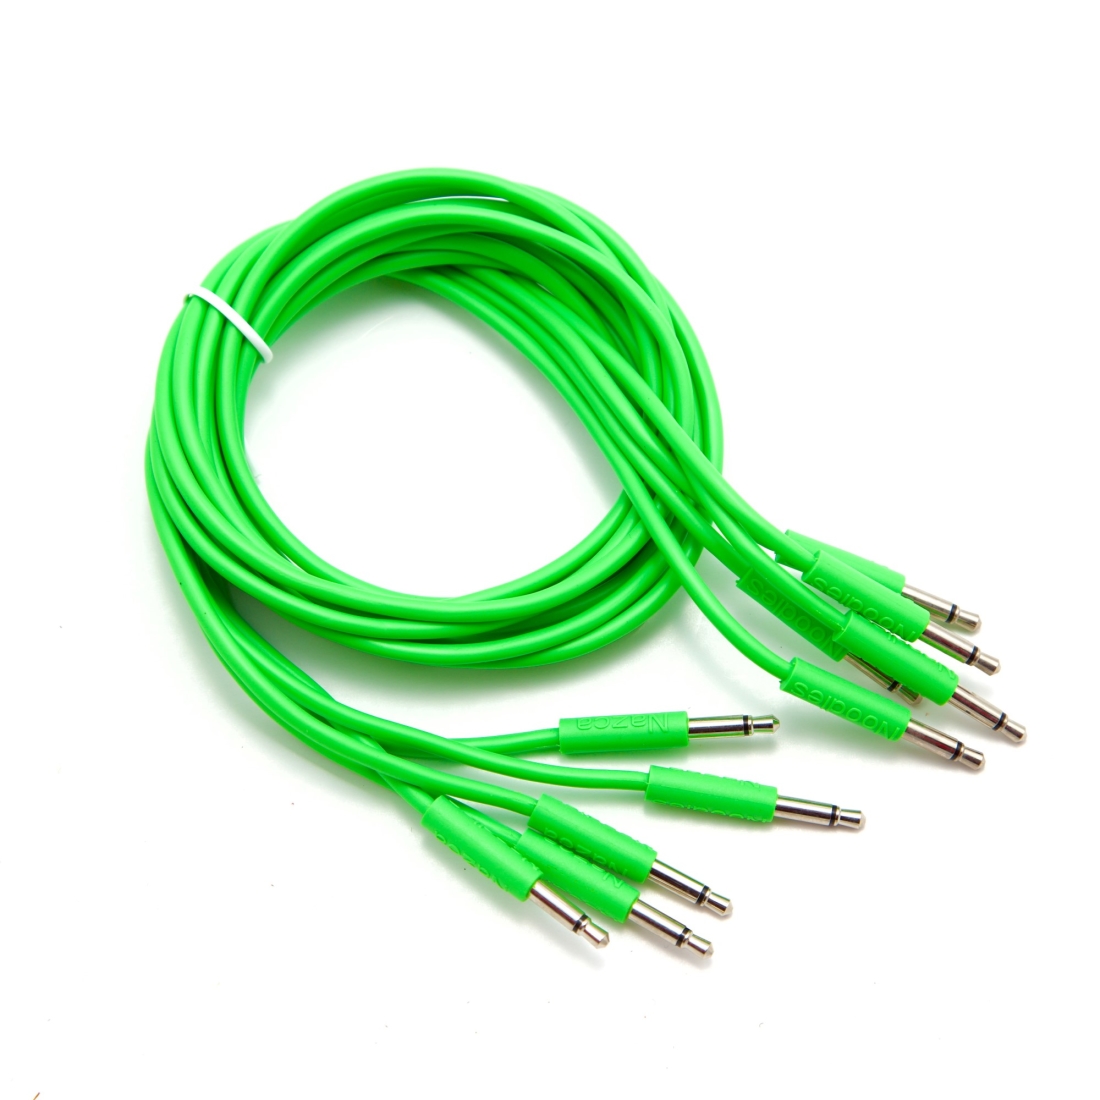 Patch Cables 3.5mm TS to 3.5mm TS - 300cm - Green (2-Pack)